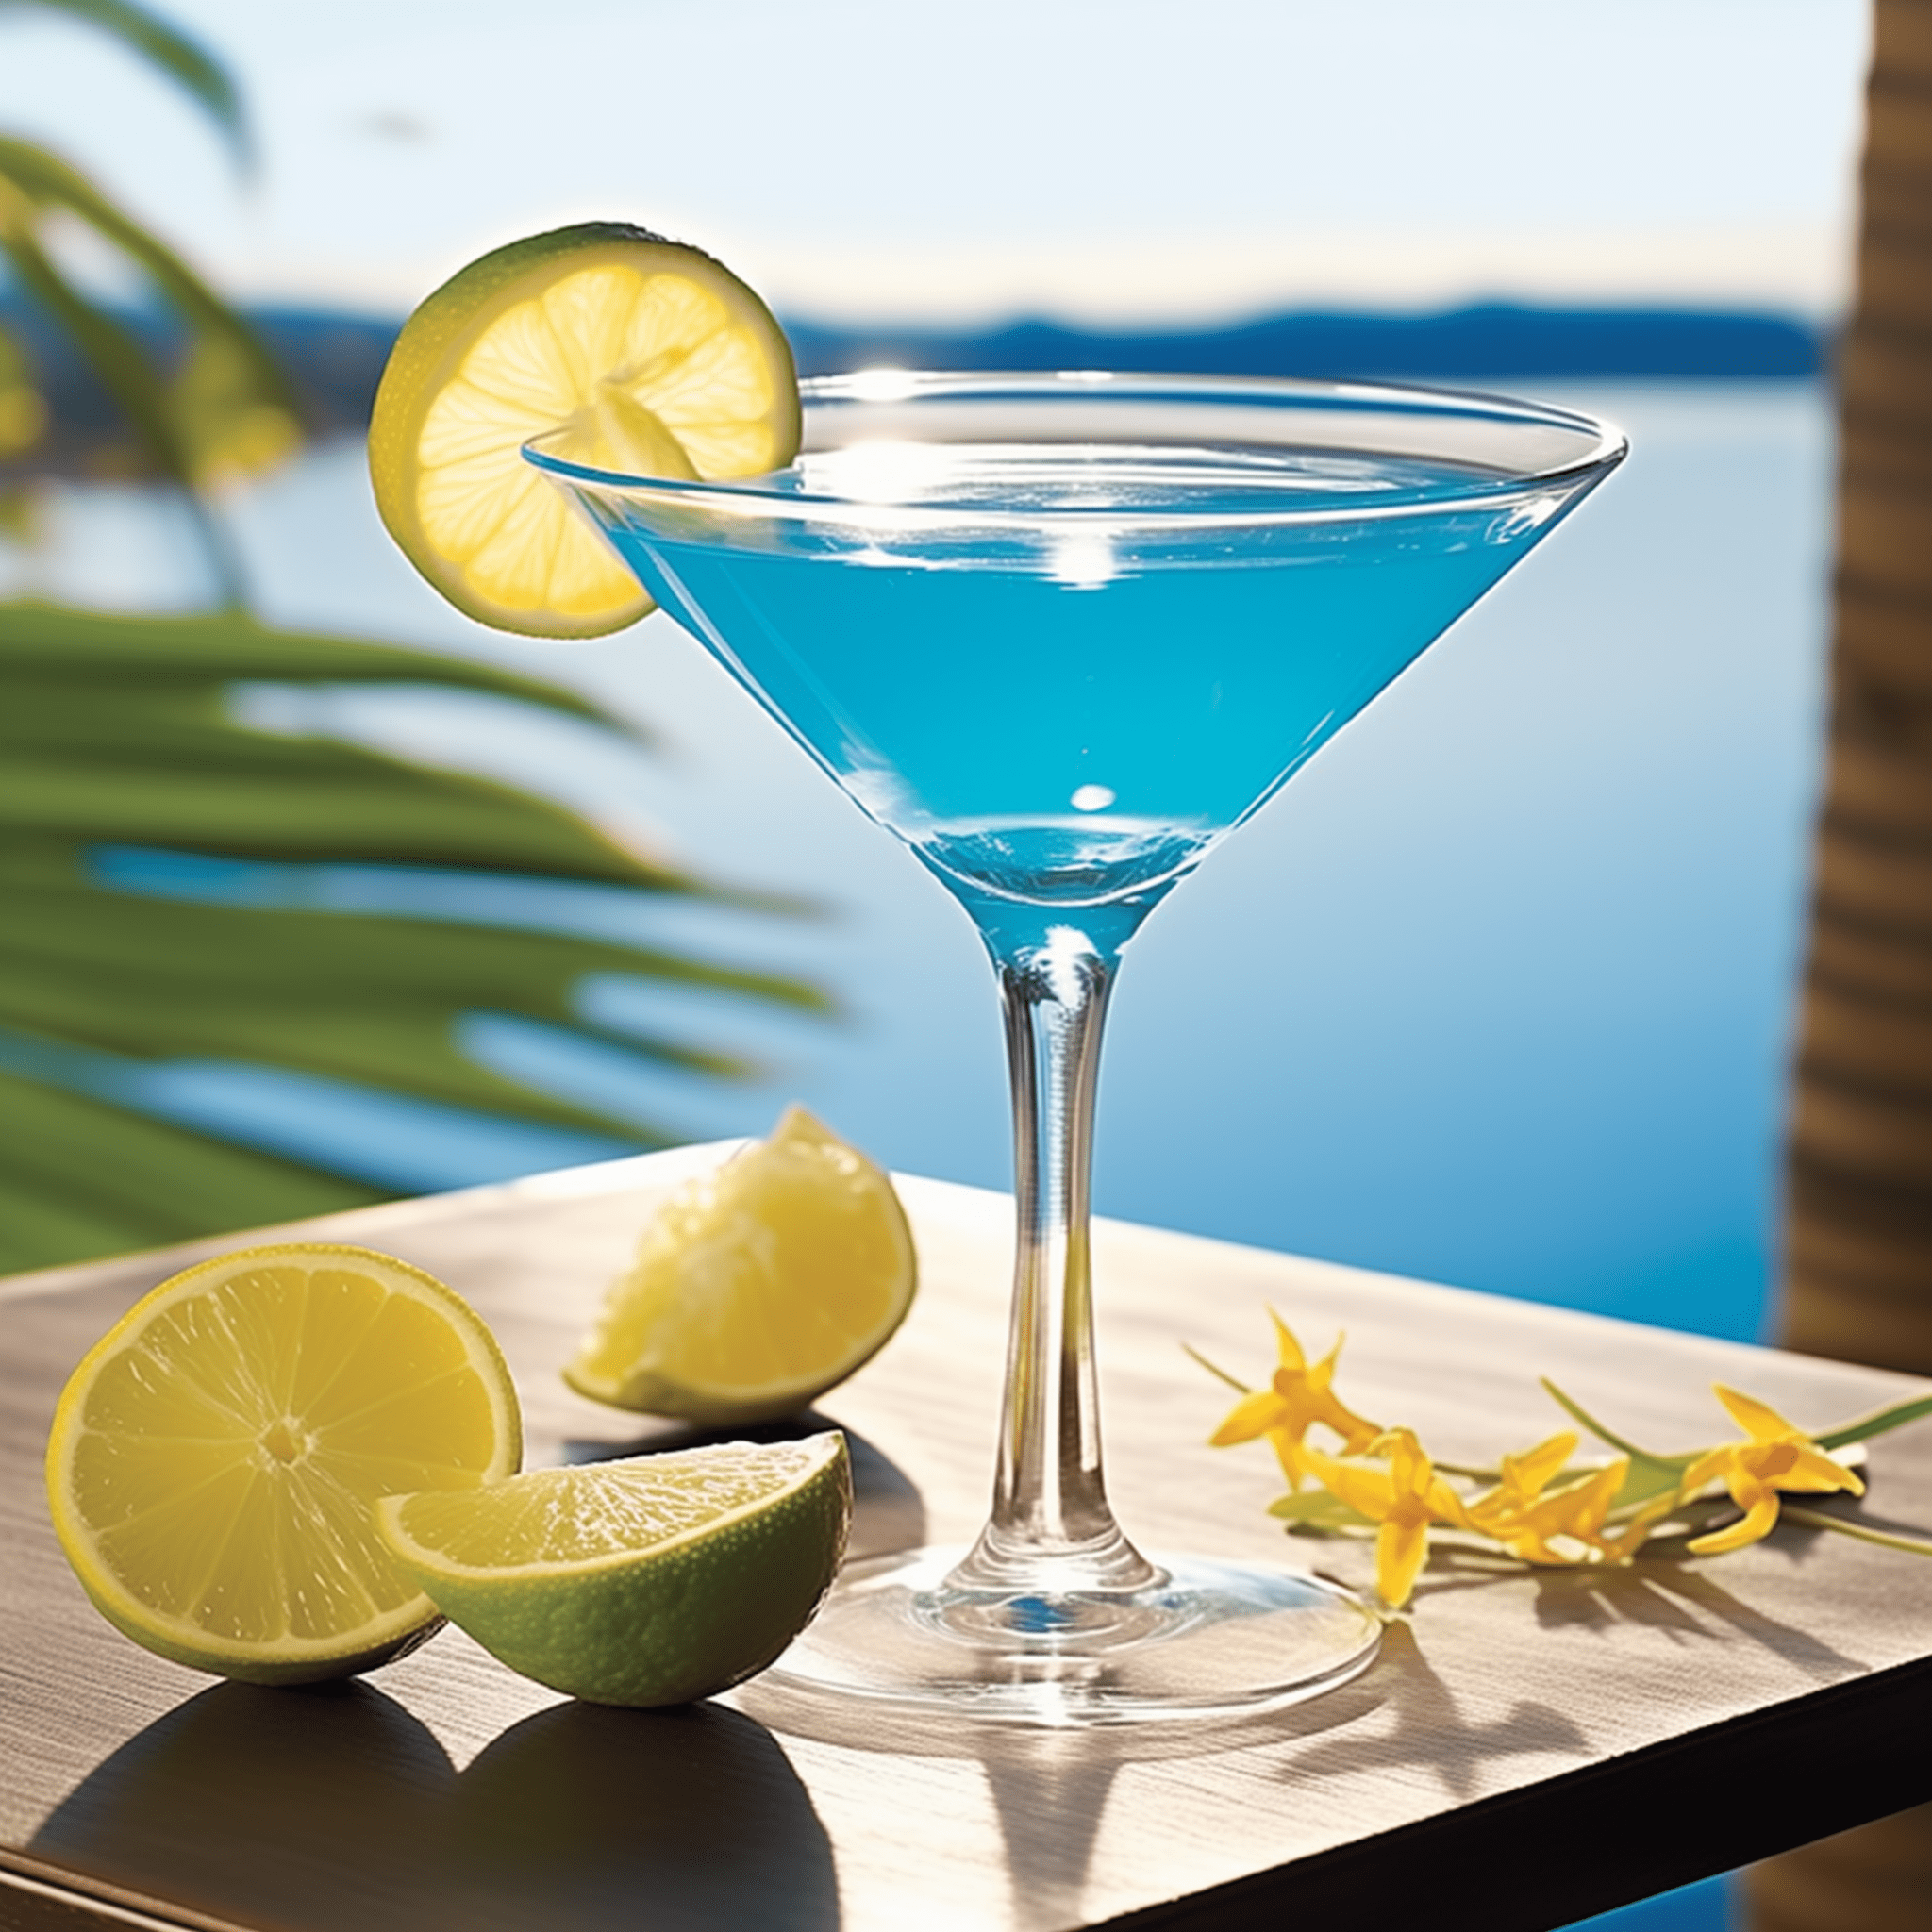 Hypnotic Martini Cocktail Recipe - The Hypnotic Martini offers a sweet and fruity flavor profile with a subtle hint of tartness. It's a smooth and seductive drink with a strong presence of tropical fruit notes, balanced by the warmth of vodka.